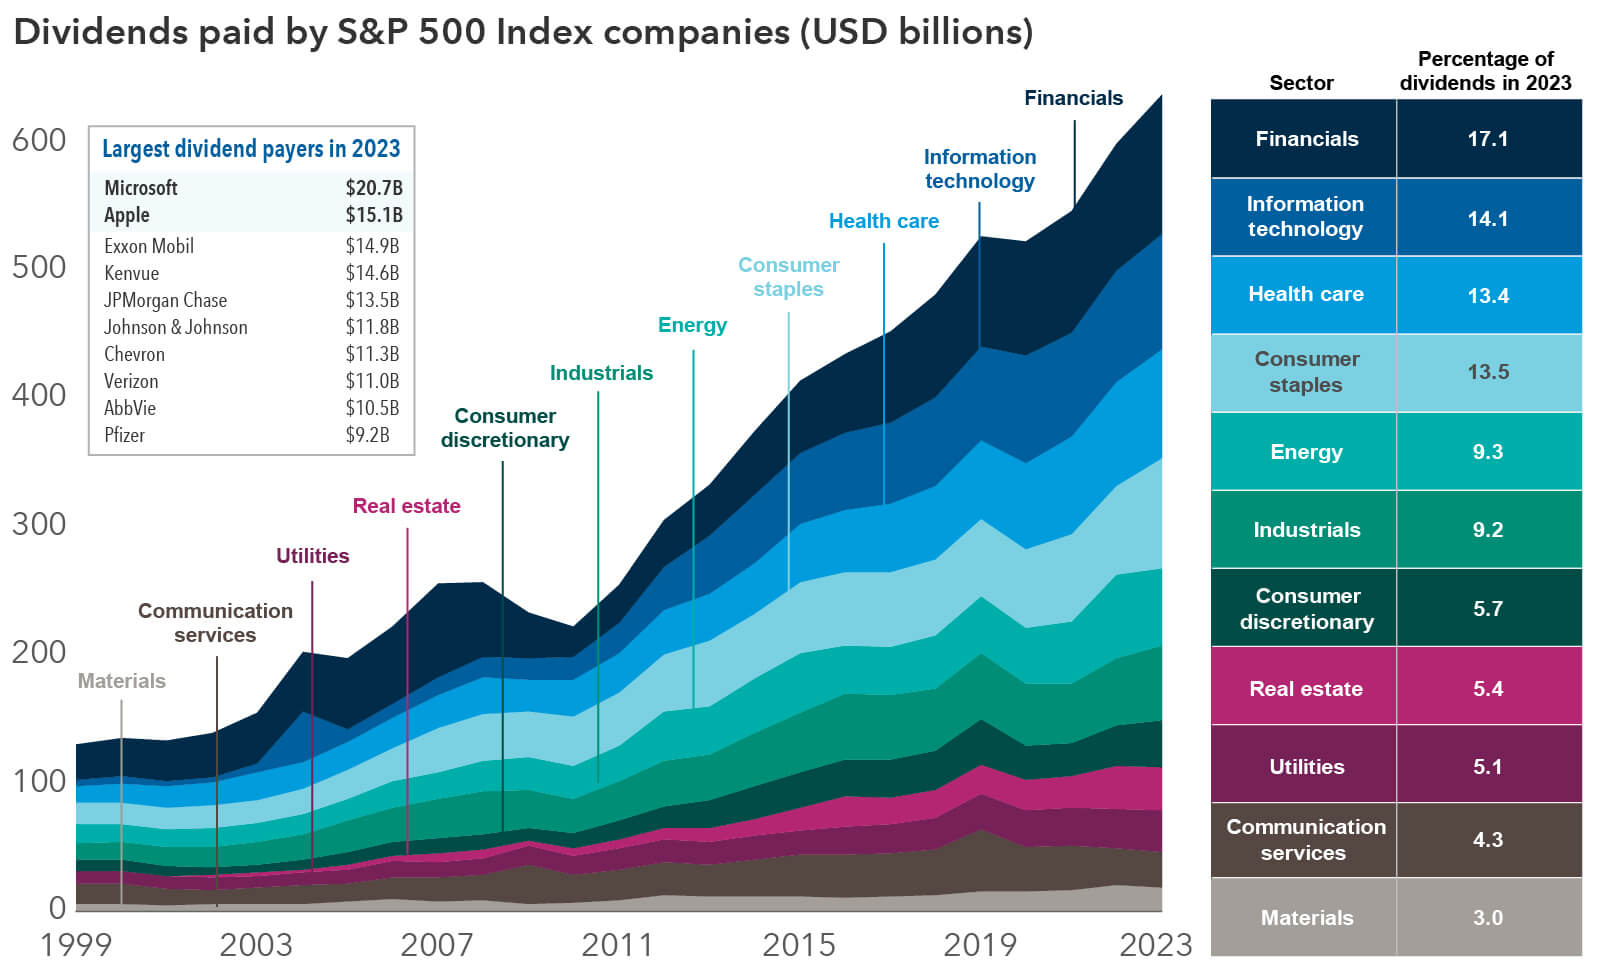 The stacked area chart above shows the value of dividend contributions by sector to the S&P 500 Index in billions of U.S. dollars from 1999 to 2023. The graph displays data for the following sectors: communication services, consumer discretionary, consumer staples, energy, financials, health care, industrials, information technology, materials, real estate and utilities. The left vertical axis represents values from zero to $650 billion, while the bottom horizontal axis indicates years. Overall, dividend contributions rise across most sectors over time. To the right of the chart, an inset box lists the dividend contributions for each sector in 2023: information technology: 14.1%; consumer discretionary: 5.7%; consumer staples:13.5%; energy:9.3%; industrials: 9.2%; real estate: 5.4%; utilities: 5.1%; communication services: 4.3%; financials: 17.1%; health care: 13.4%; materials: 3%. An inset table lists companies and their respective dividend payments in billions of dollars. Microsoft leads with $20.7 billion, followed by Apple at $15.1 billion, Exxon Mobil at $14.9 billion, Kenvue at $14.6 billion, JPMorgan Chase at $13.5 billion, Johnson & Johnson at $11.8 billion, Chevron at $11.3 billion, Verizon at $11 billion, AbbVie at $10.5 billion, and Pfizer with $9.2 billion.